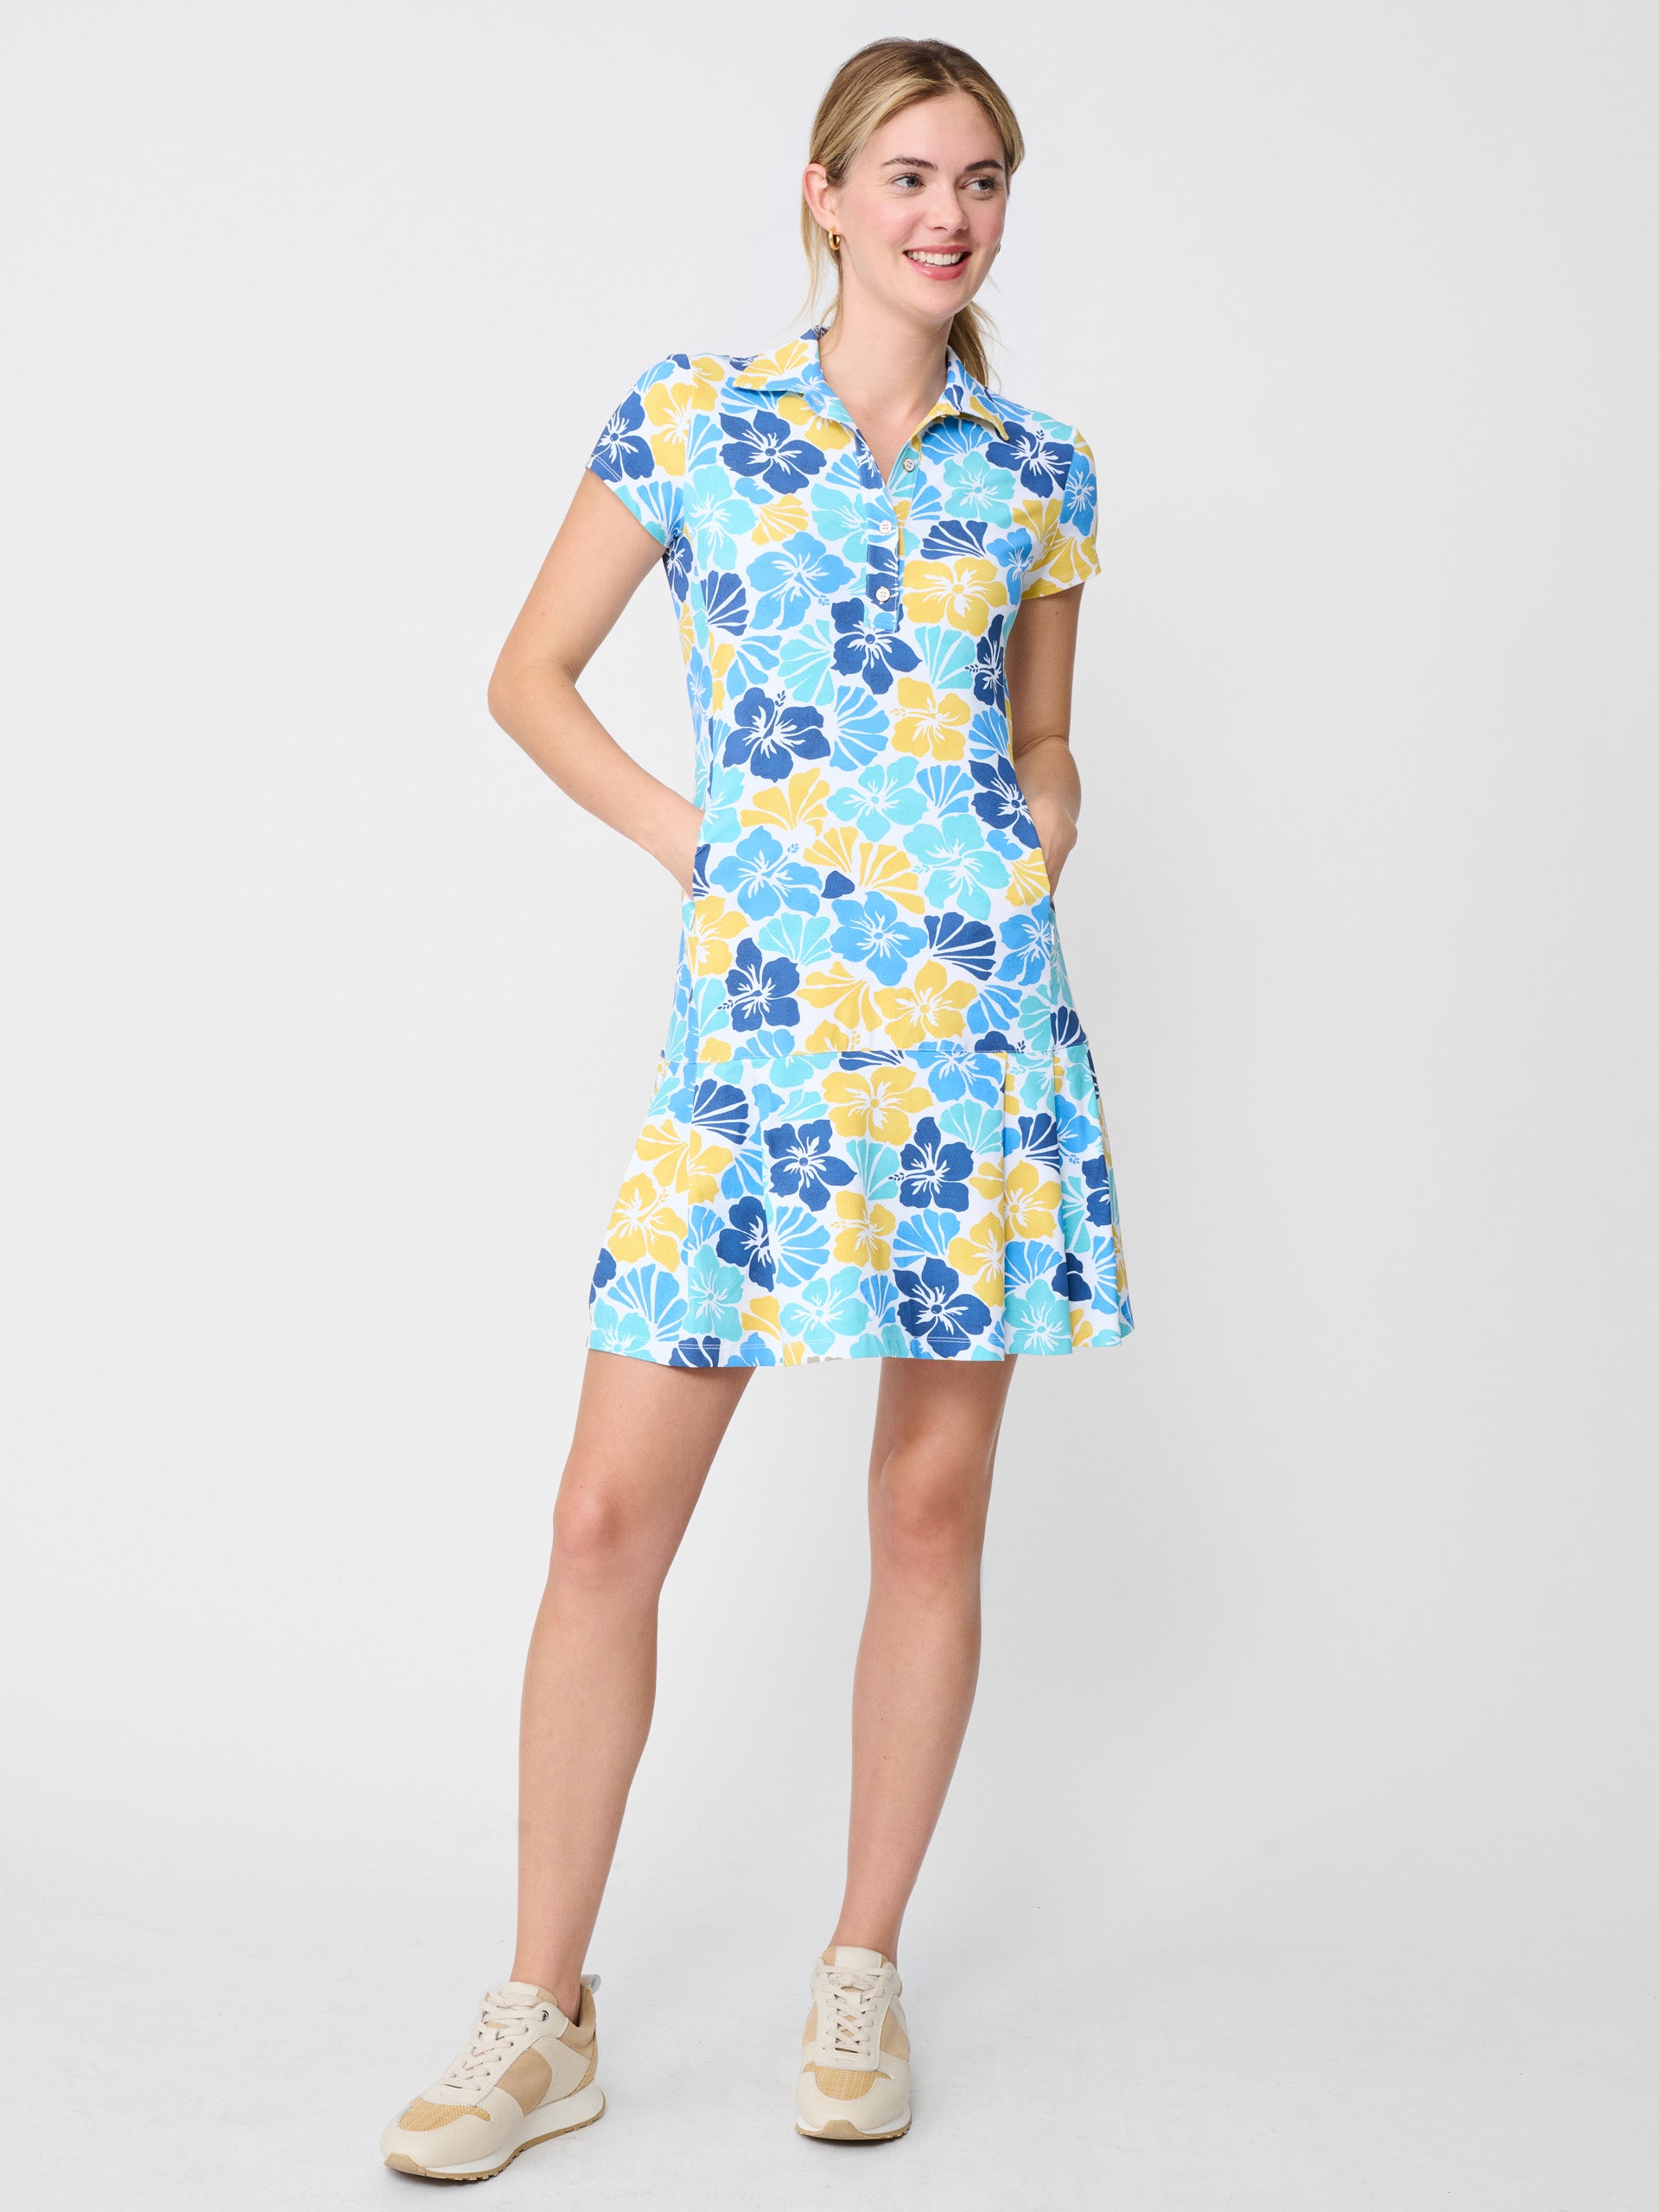 J.McLaughlin Dorte dress in blue/navy/yellow made with Catalina cloth.